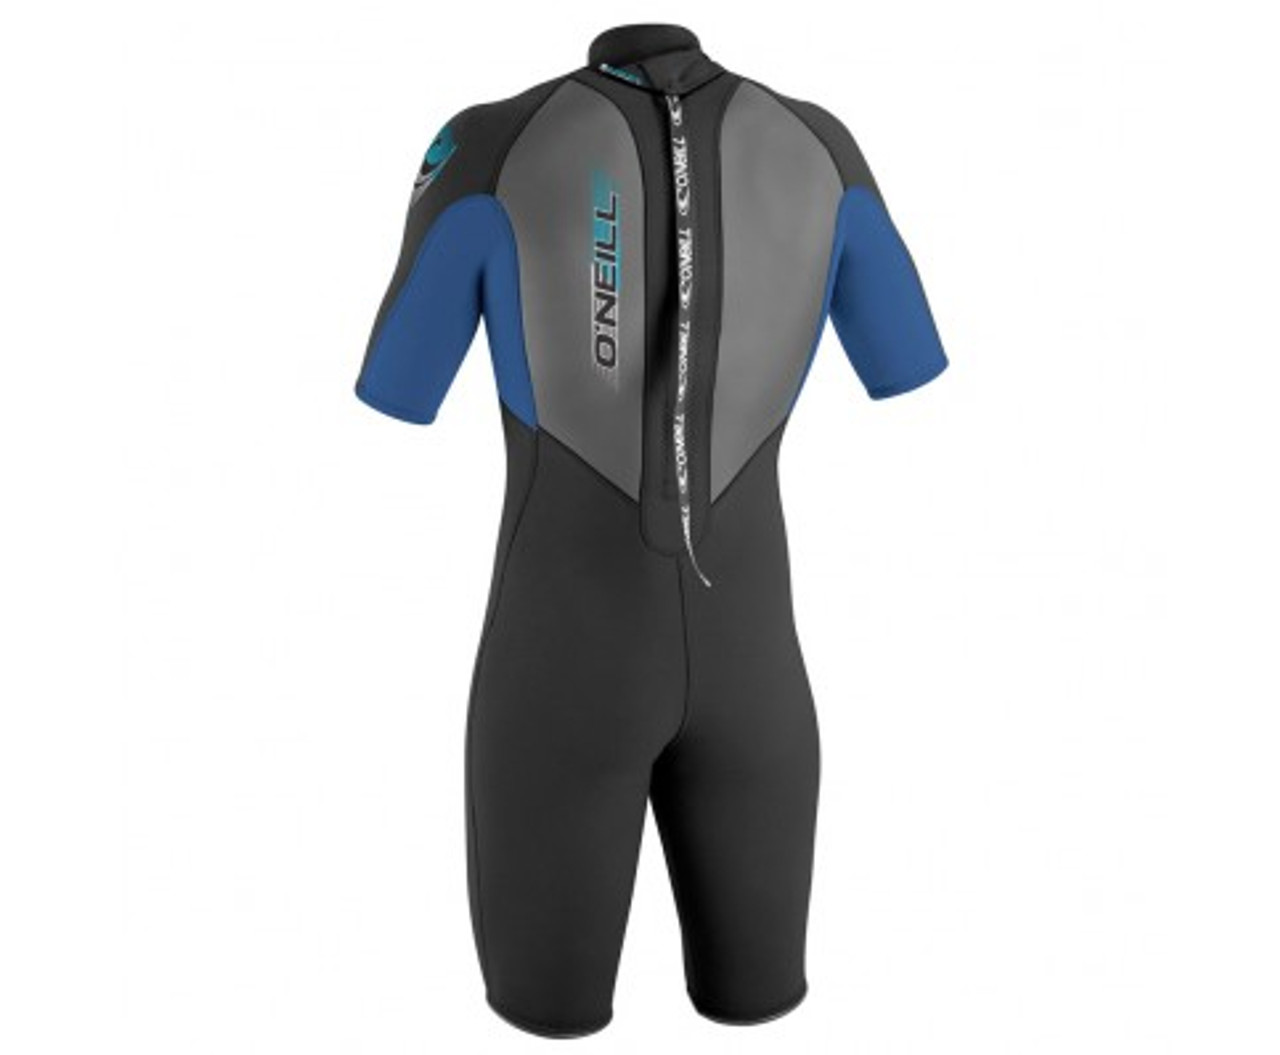 O'Neill Reactor Spring Shorty Wetsuit (BACK) for the Lowest Price at RIDE THE WAVE